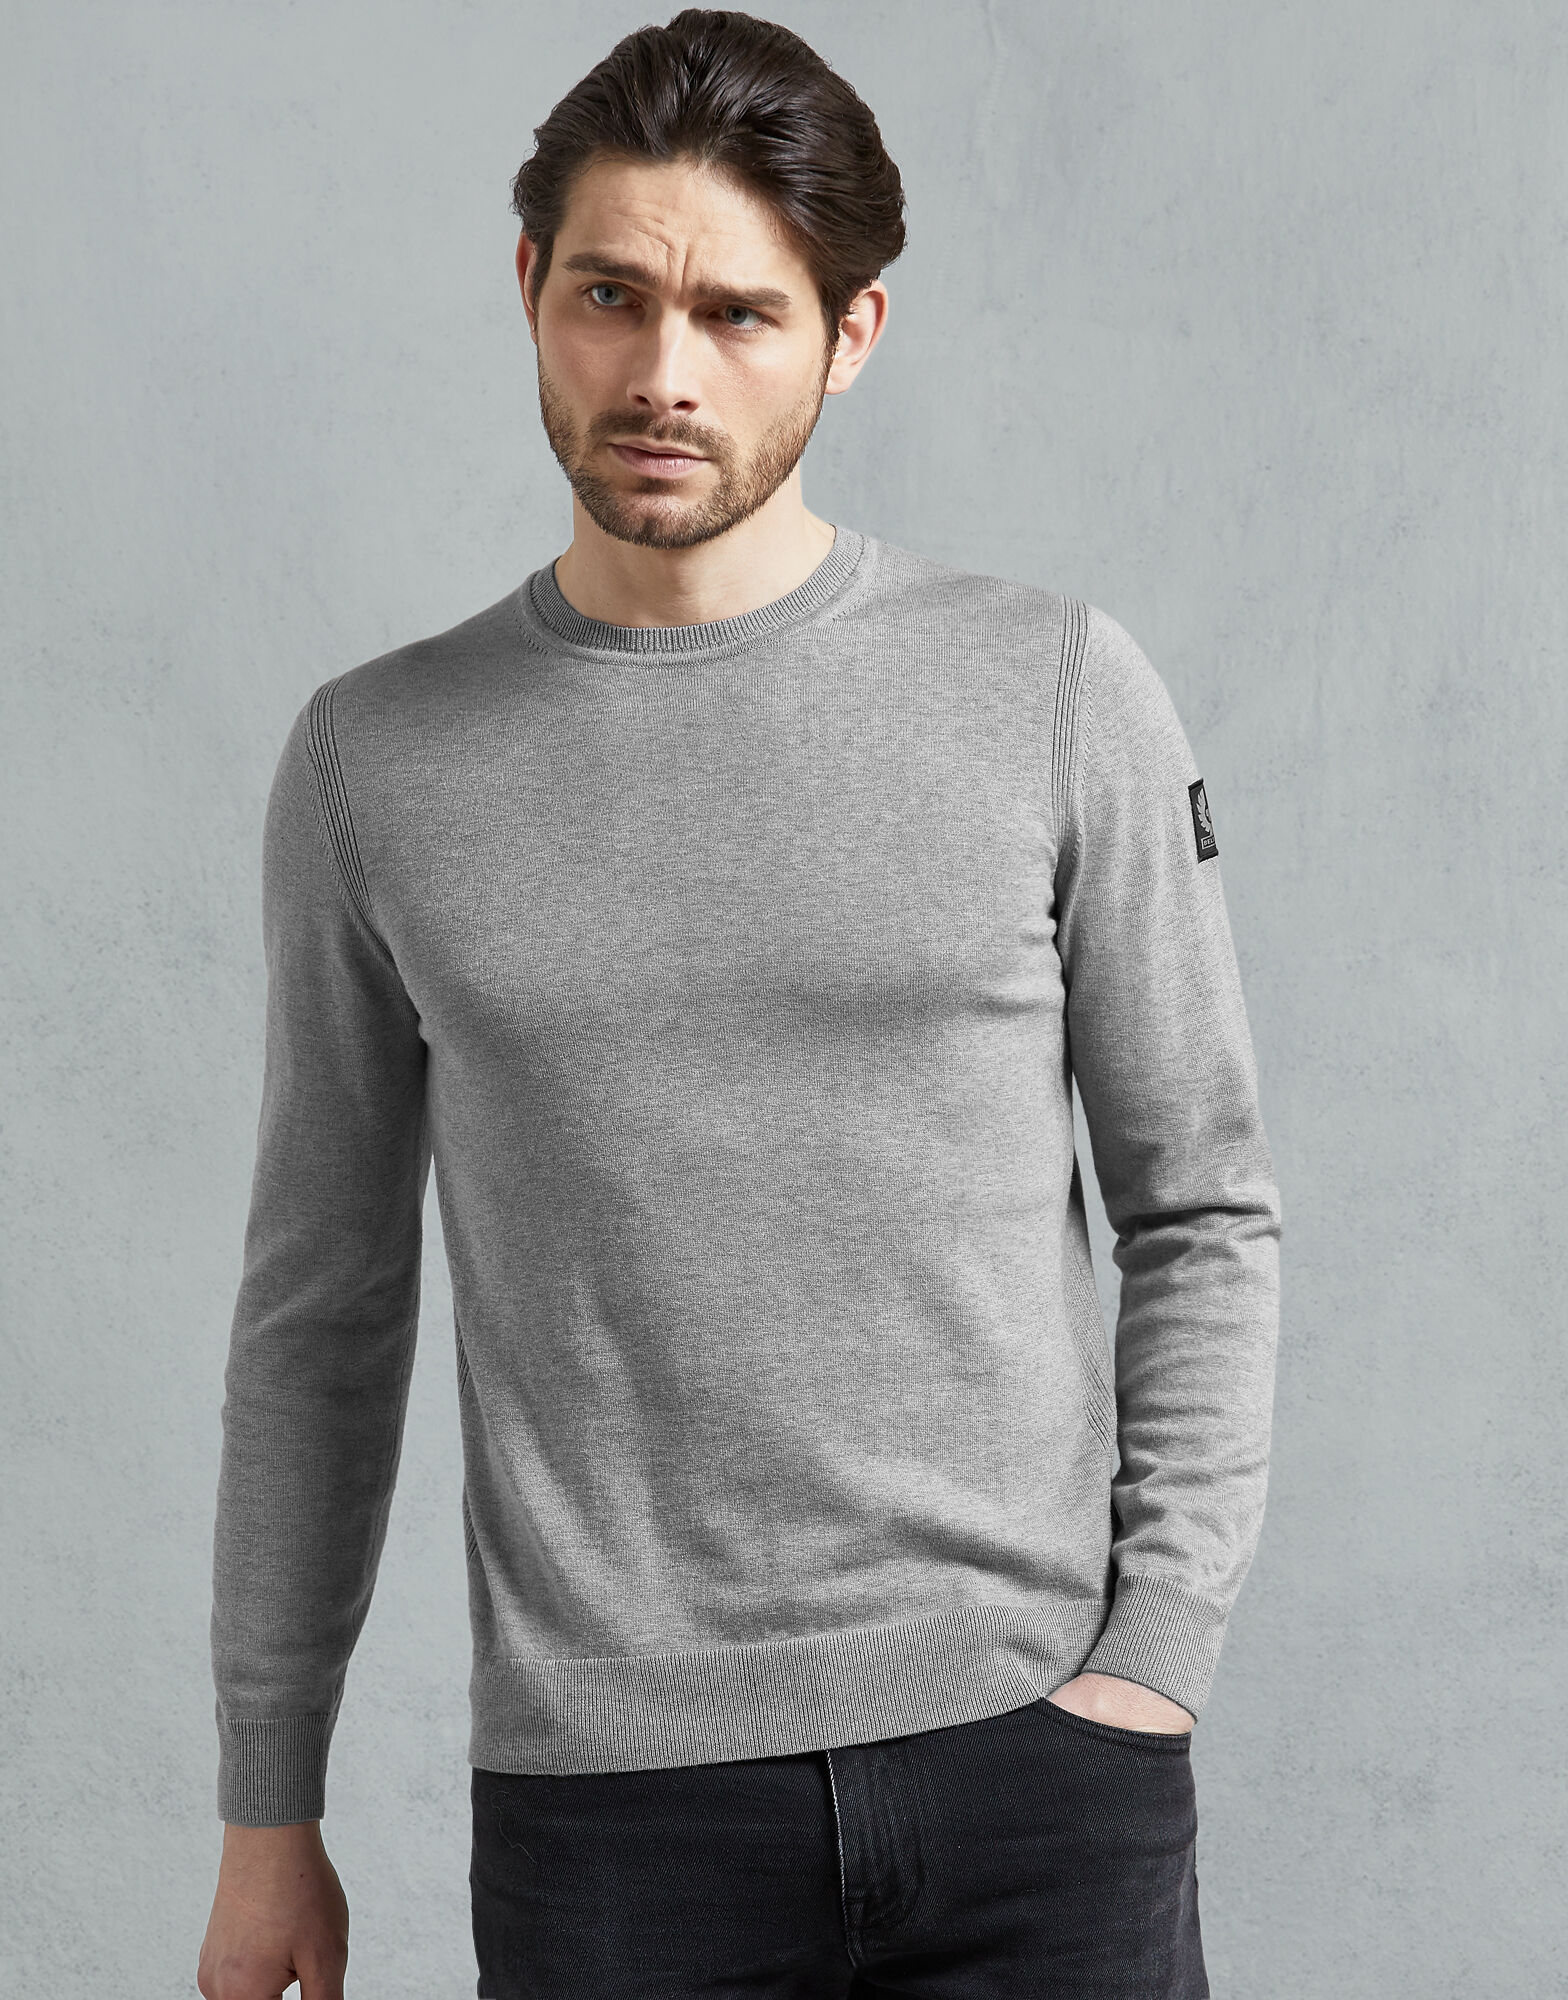 Free Knitting Patterns For Men's Sweaters Mens Sweaters Mens Cardigans Zip Tops Knitwear For Men